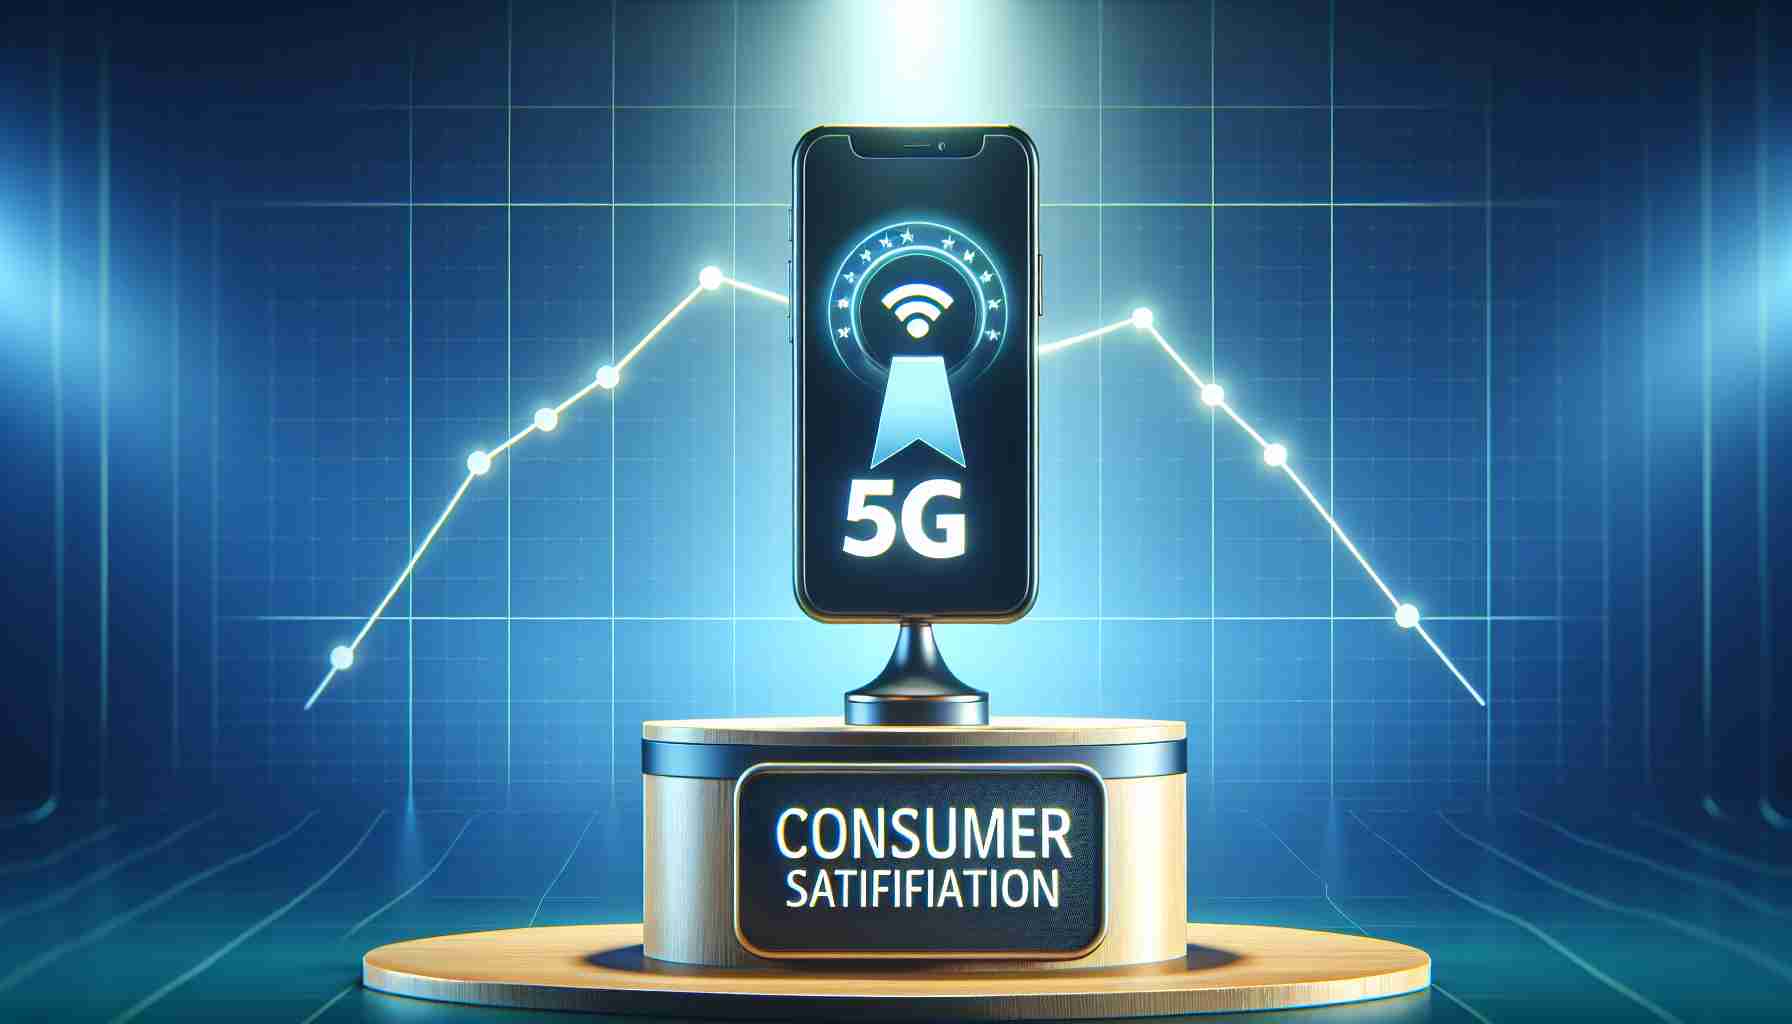 Samsung Takes the Lead in U.S. Consumer Satisfaction for 5G Smartphones